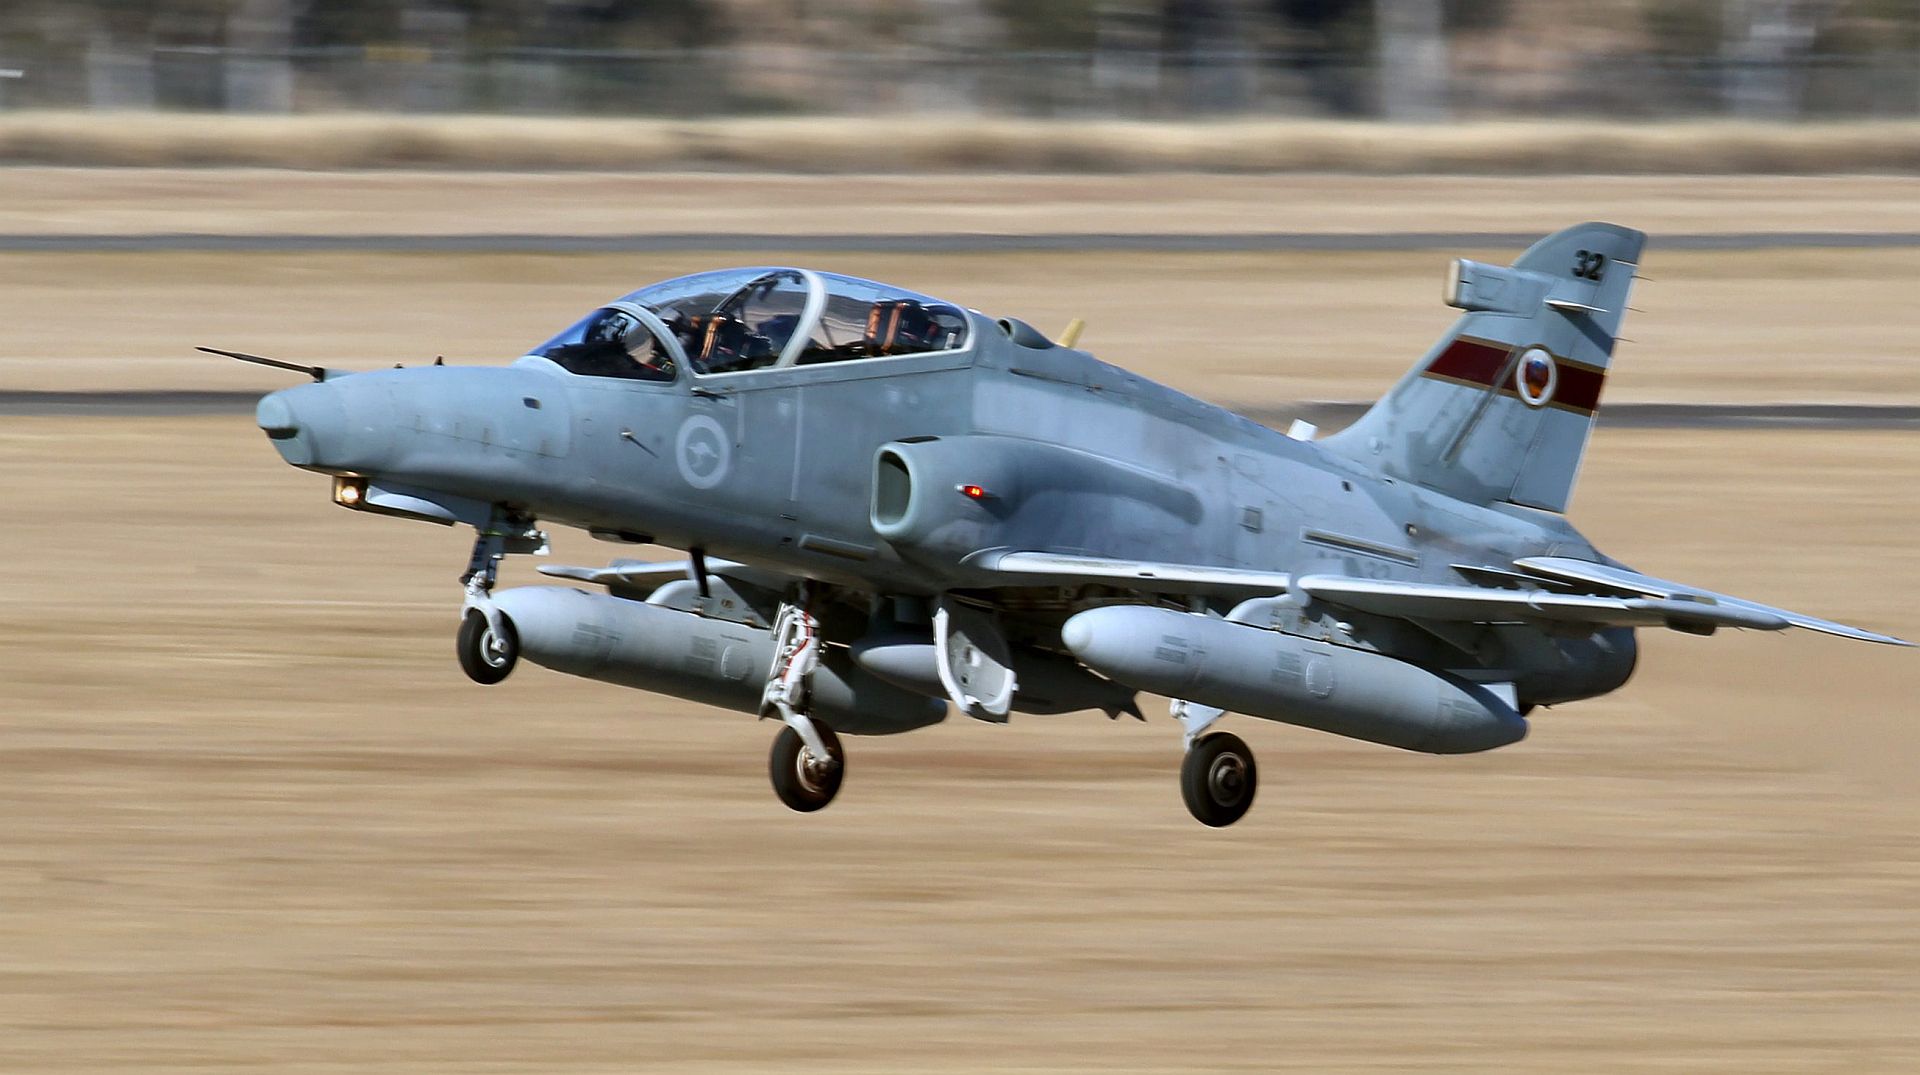  76 Squadron Takes Off From RAAF Base Amberley In Queensland On A Work Up Sortie For Talisman Sabre 2011